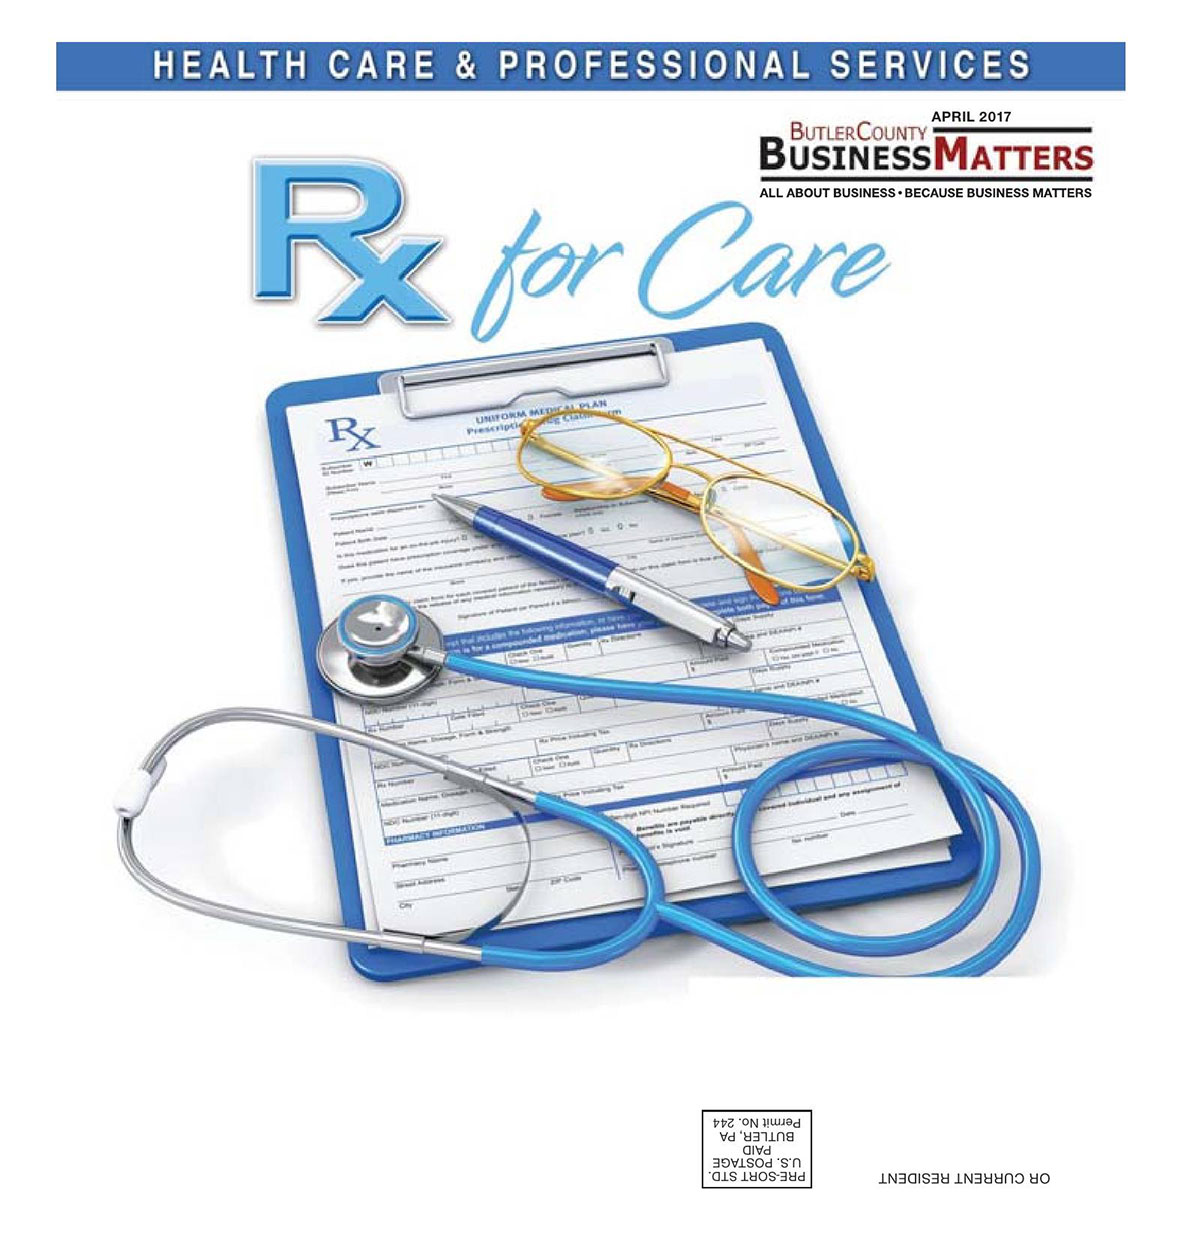 April 2017 - Health Care & Professional Services - Rx for Care